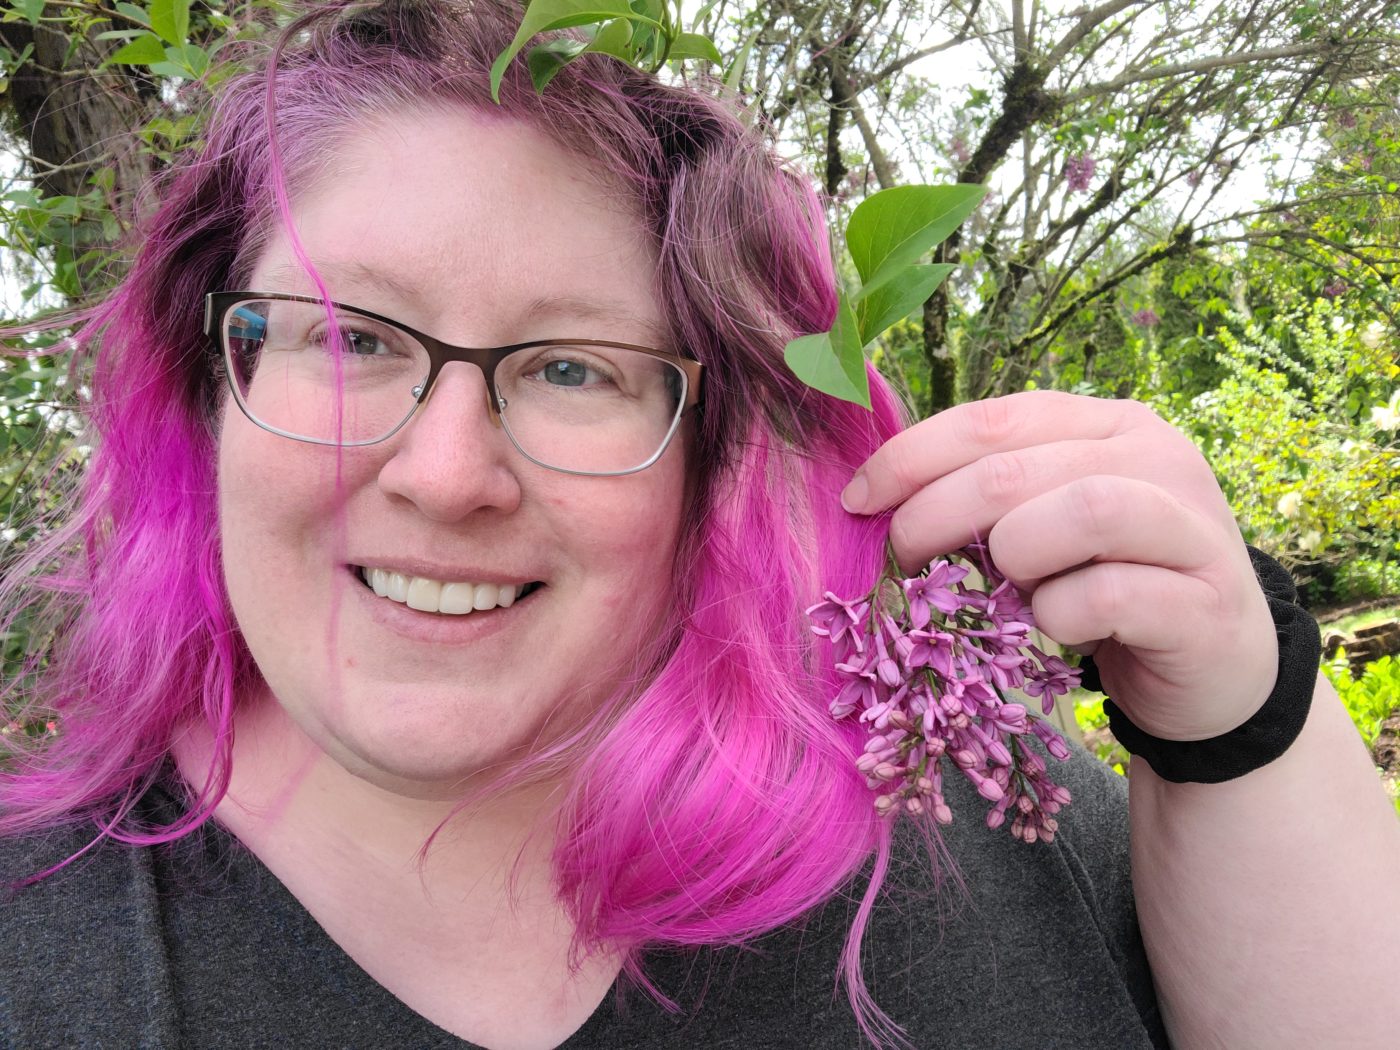 Lindley, a fat white woman with glasses and a gray v-neck top, smiles and holds a flowering lilac branch close to her purple hair.